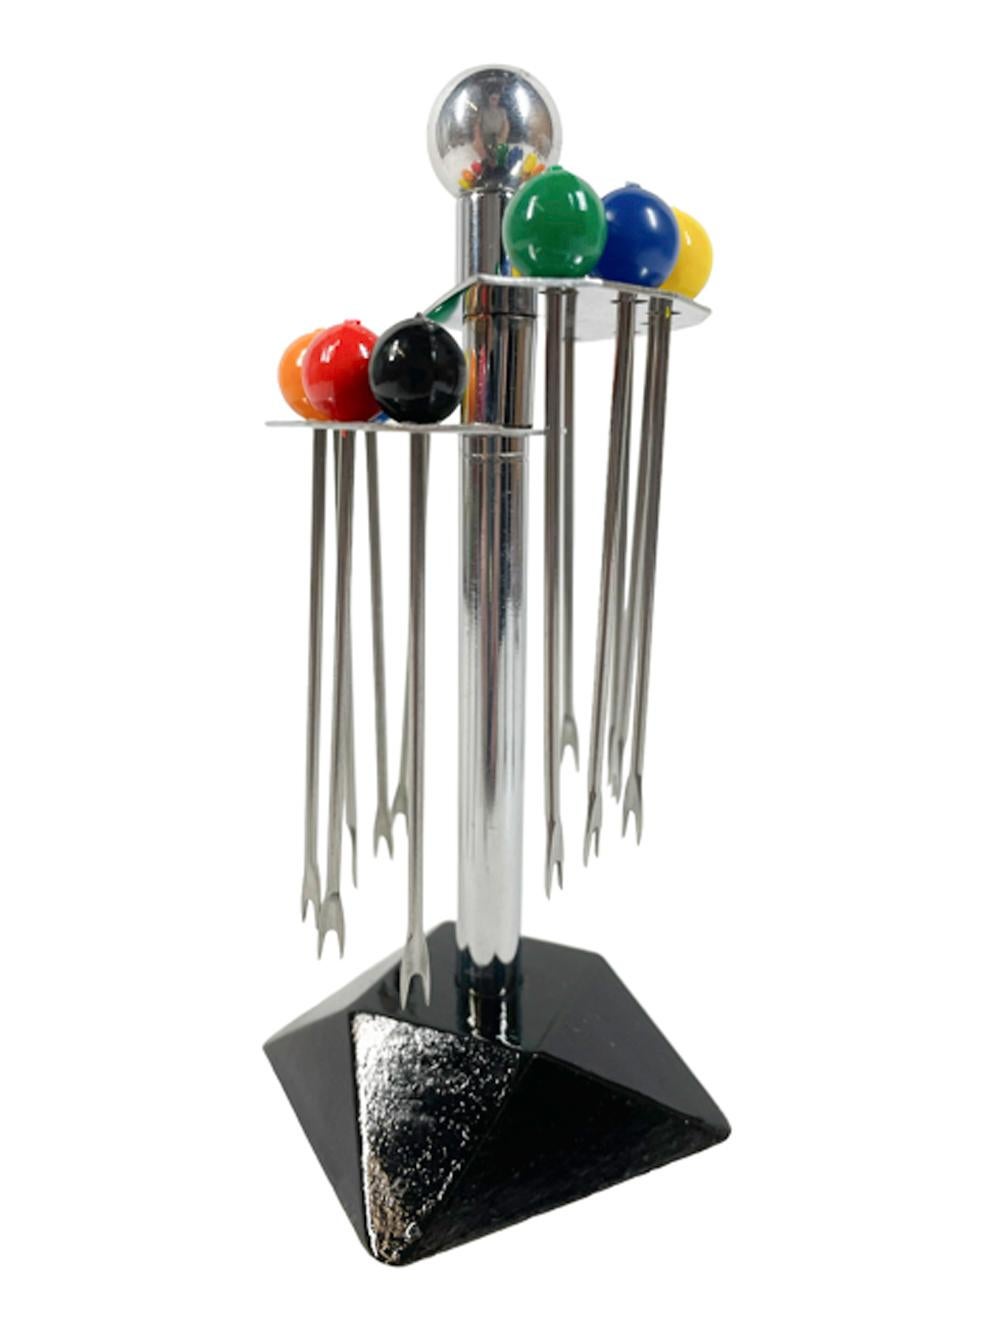 Art Deco Cocktail Pick Set on Two Tier Stand, Two Each of Six Color Ball Tops In Good Condition For Sale In Chapel Hill, NC